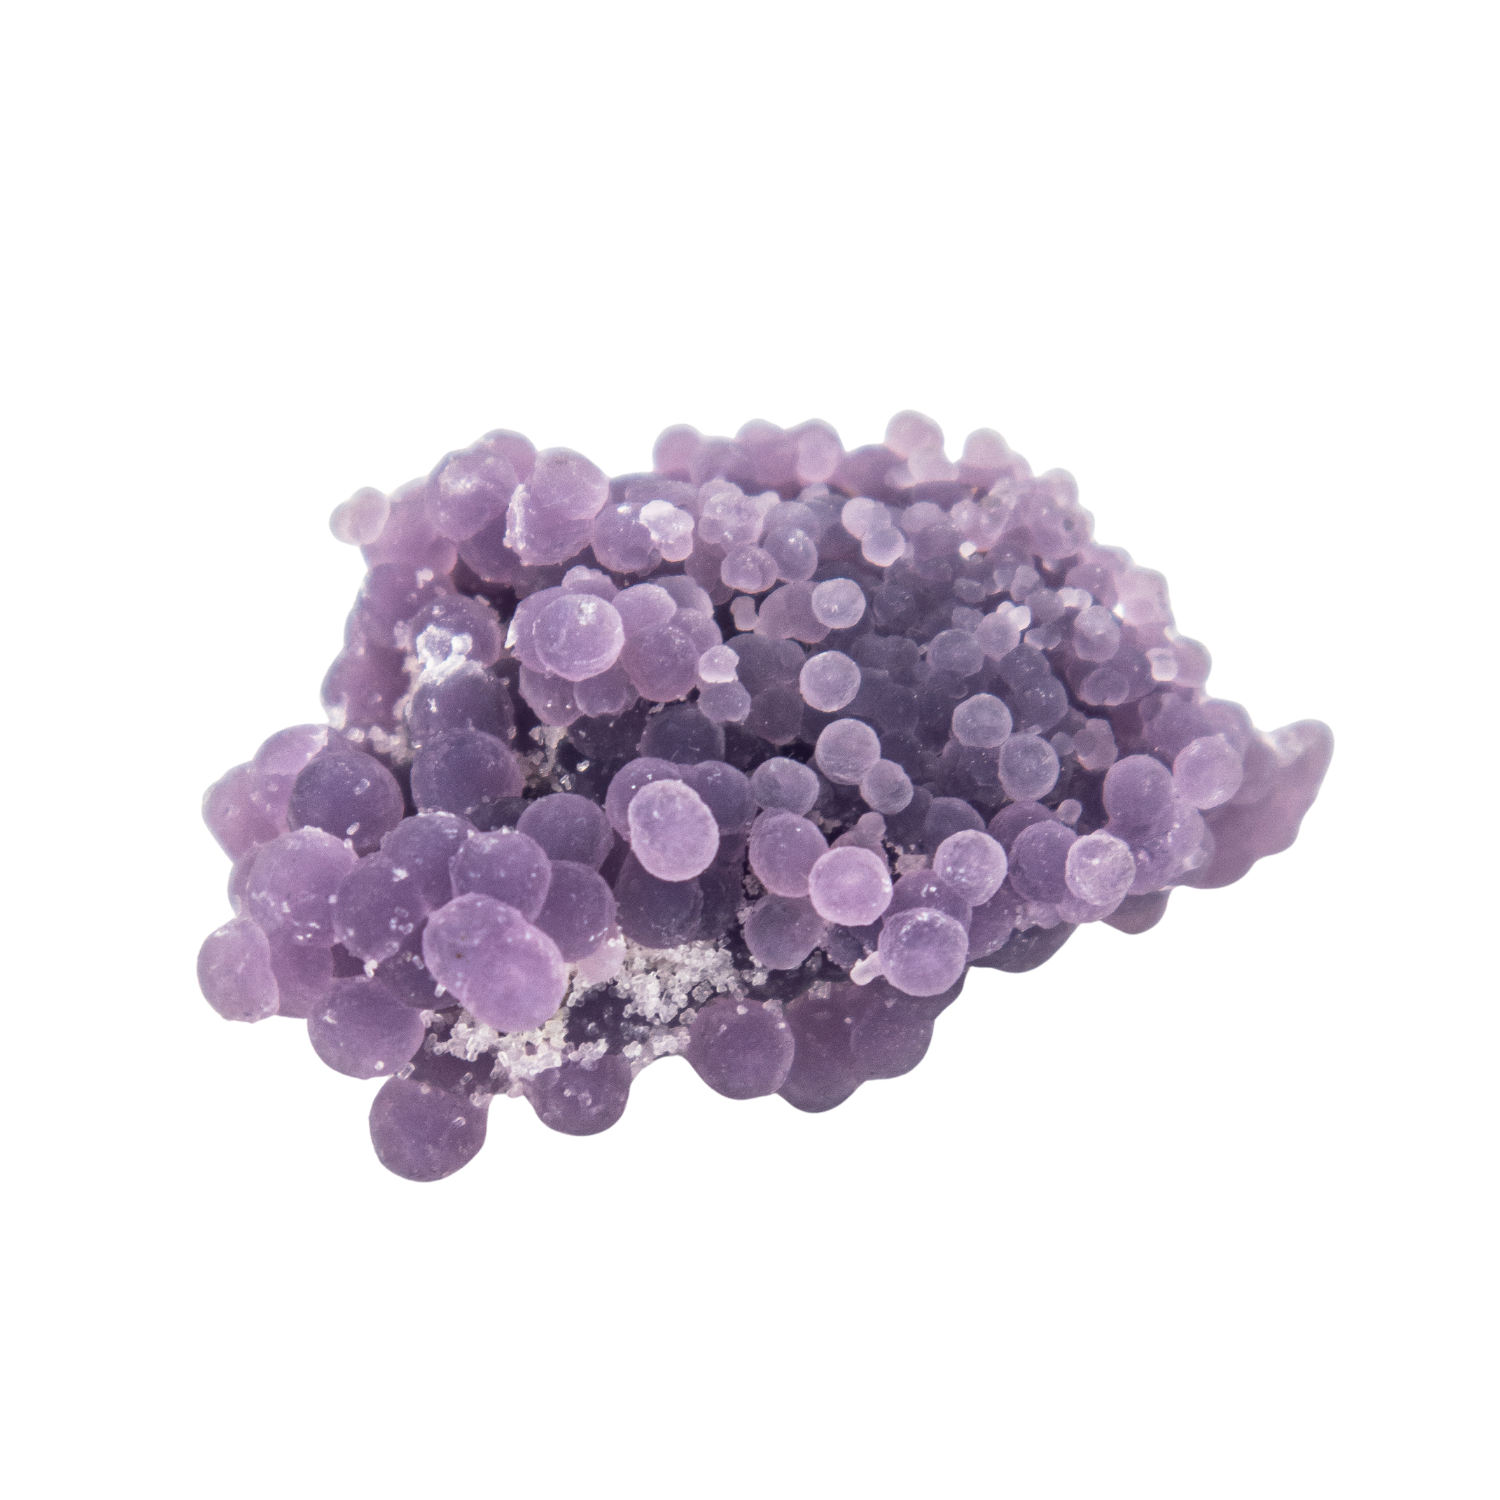 Grape Agate Crystal | Shop Energy Muse's Grape Agate Clusters